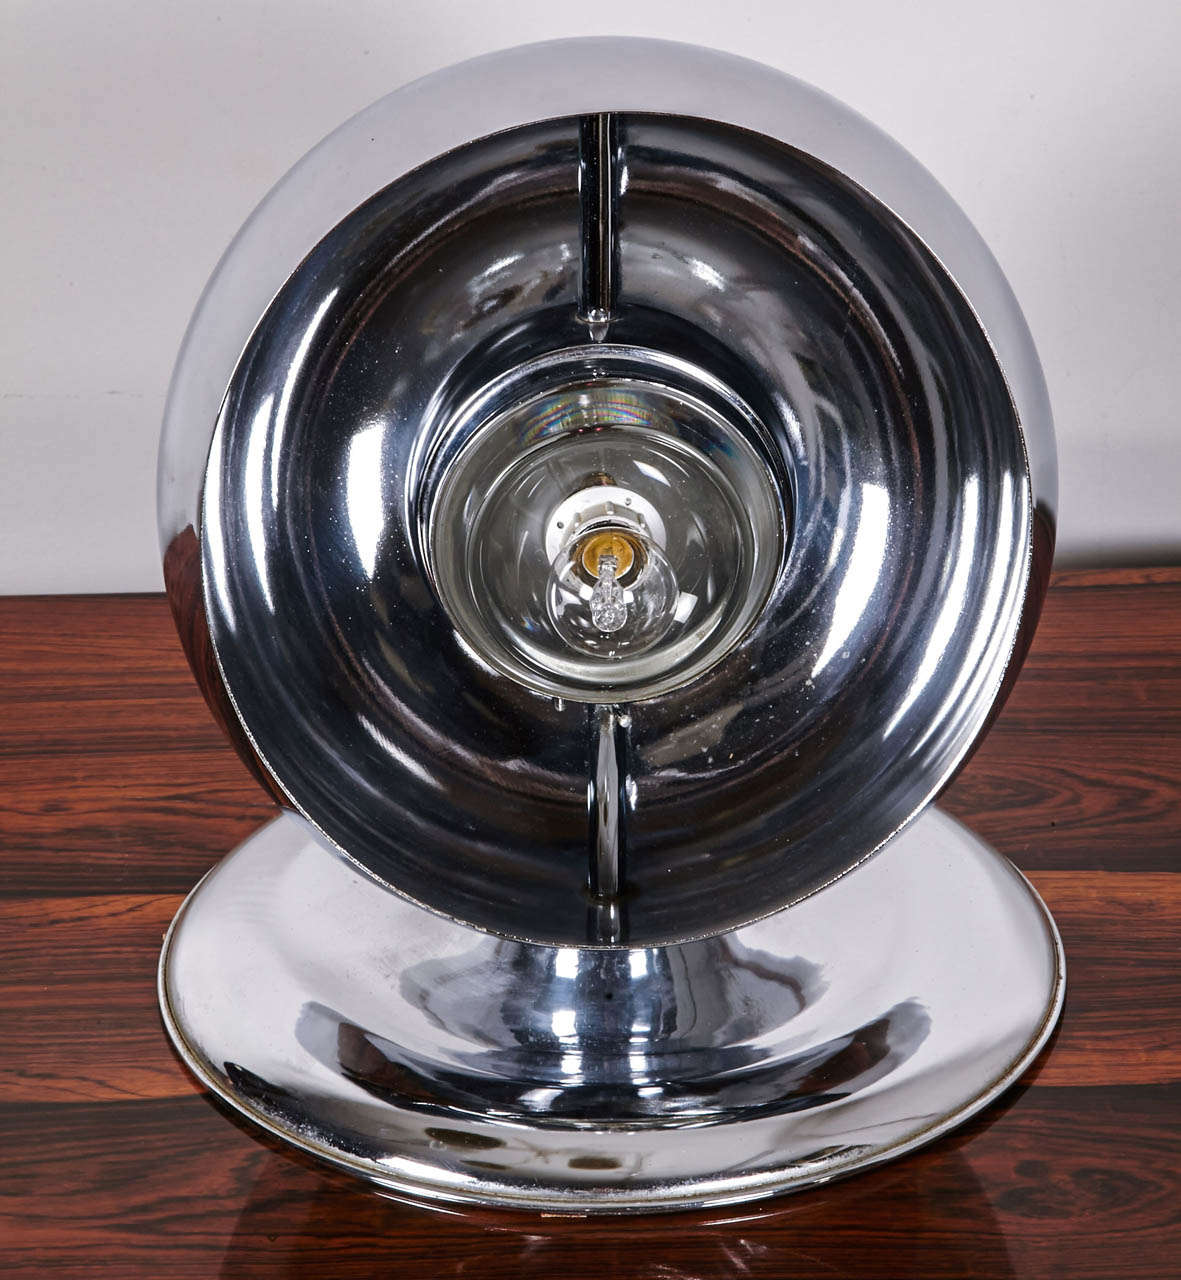 A globe chromed metal table lamp
The bulb is hidden behind the inner metal globe
Italy, 1970's